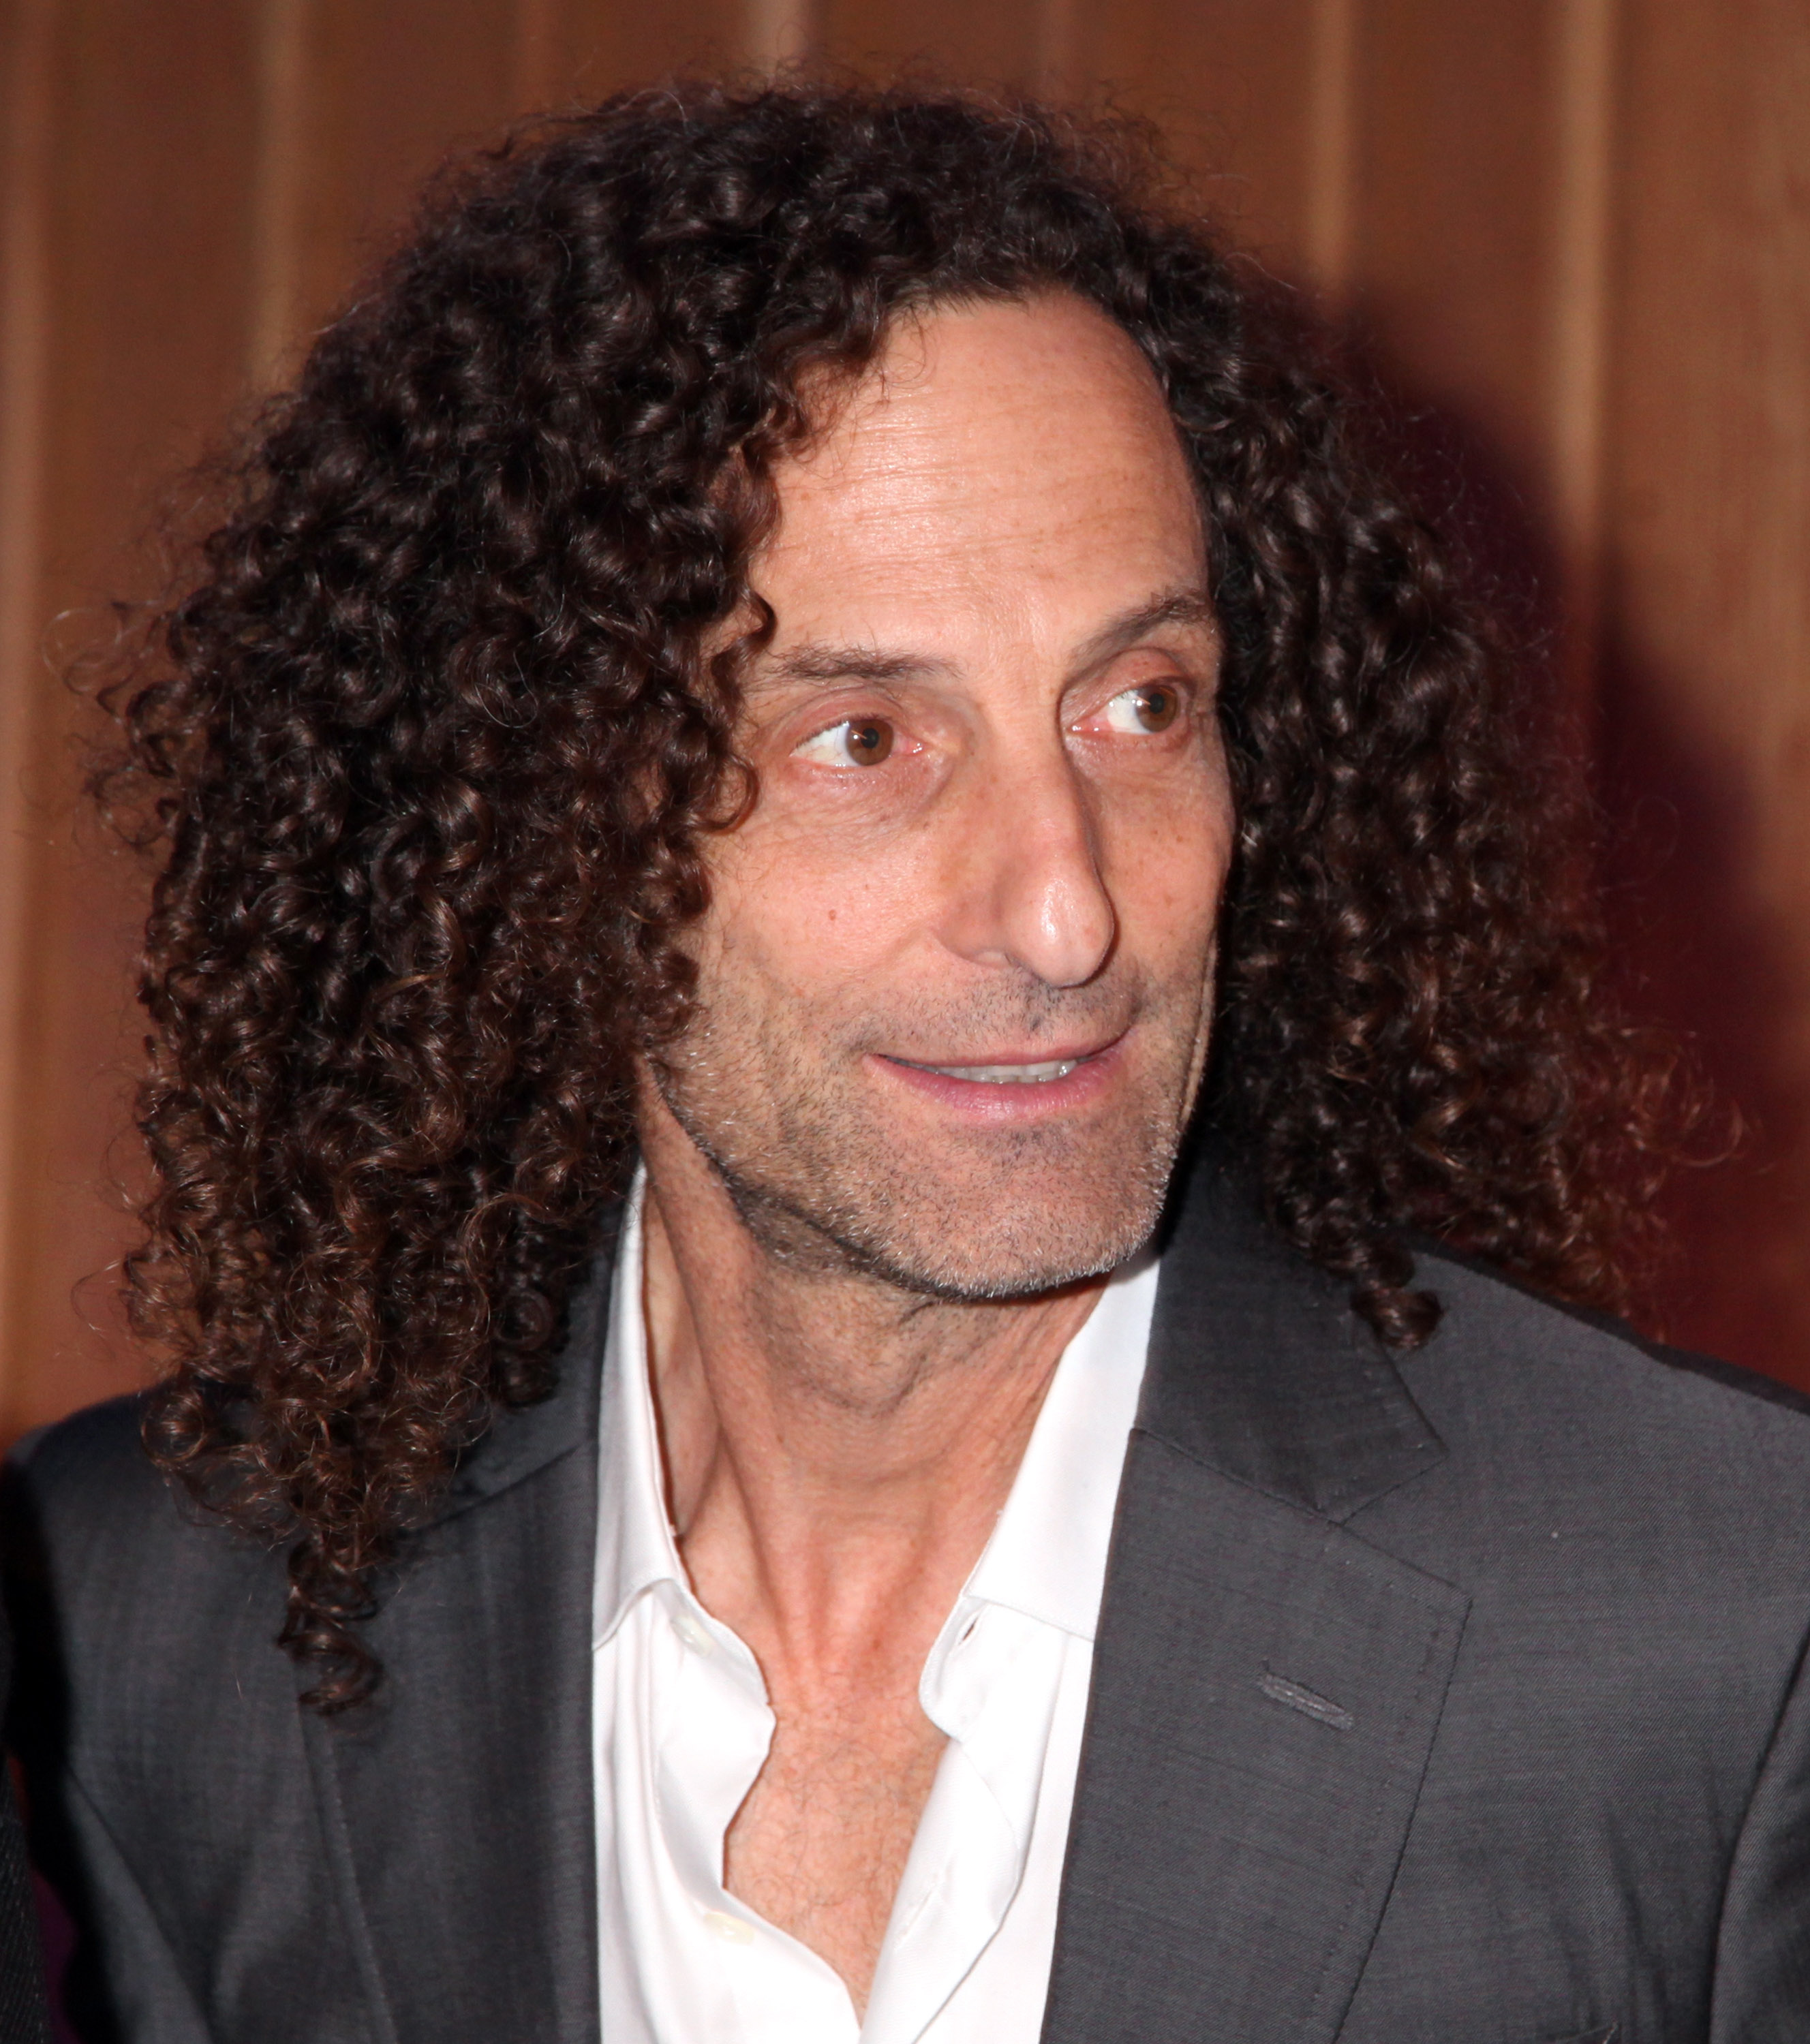 Musician Kenny G at Capitol Records Studio on December 17, 2014 in Hollywood, California. (Paul Redmond&mdash;Getty Images)